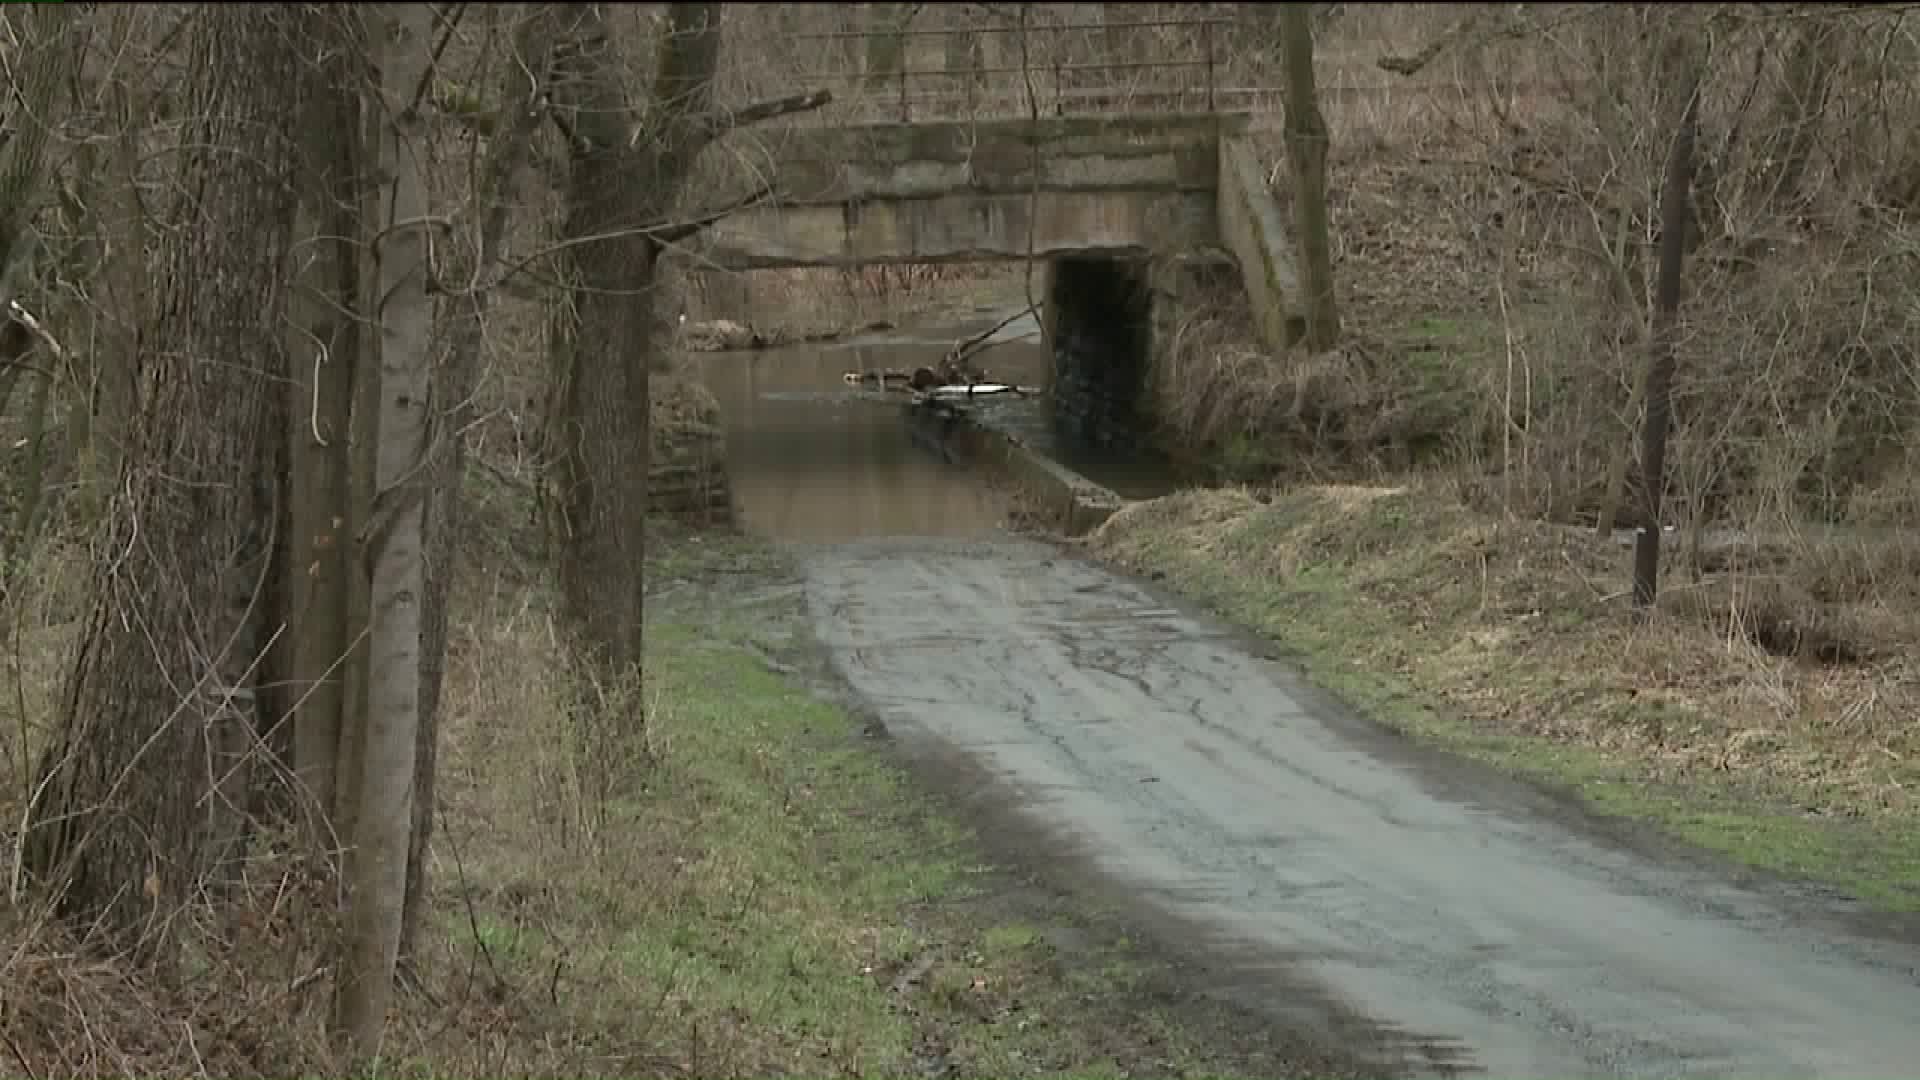 Wyoming County "Dodged a Bullet" By Avoiding Serious Flooding